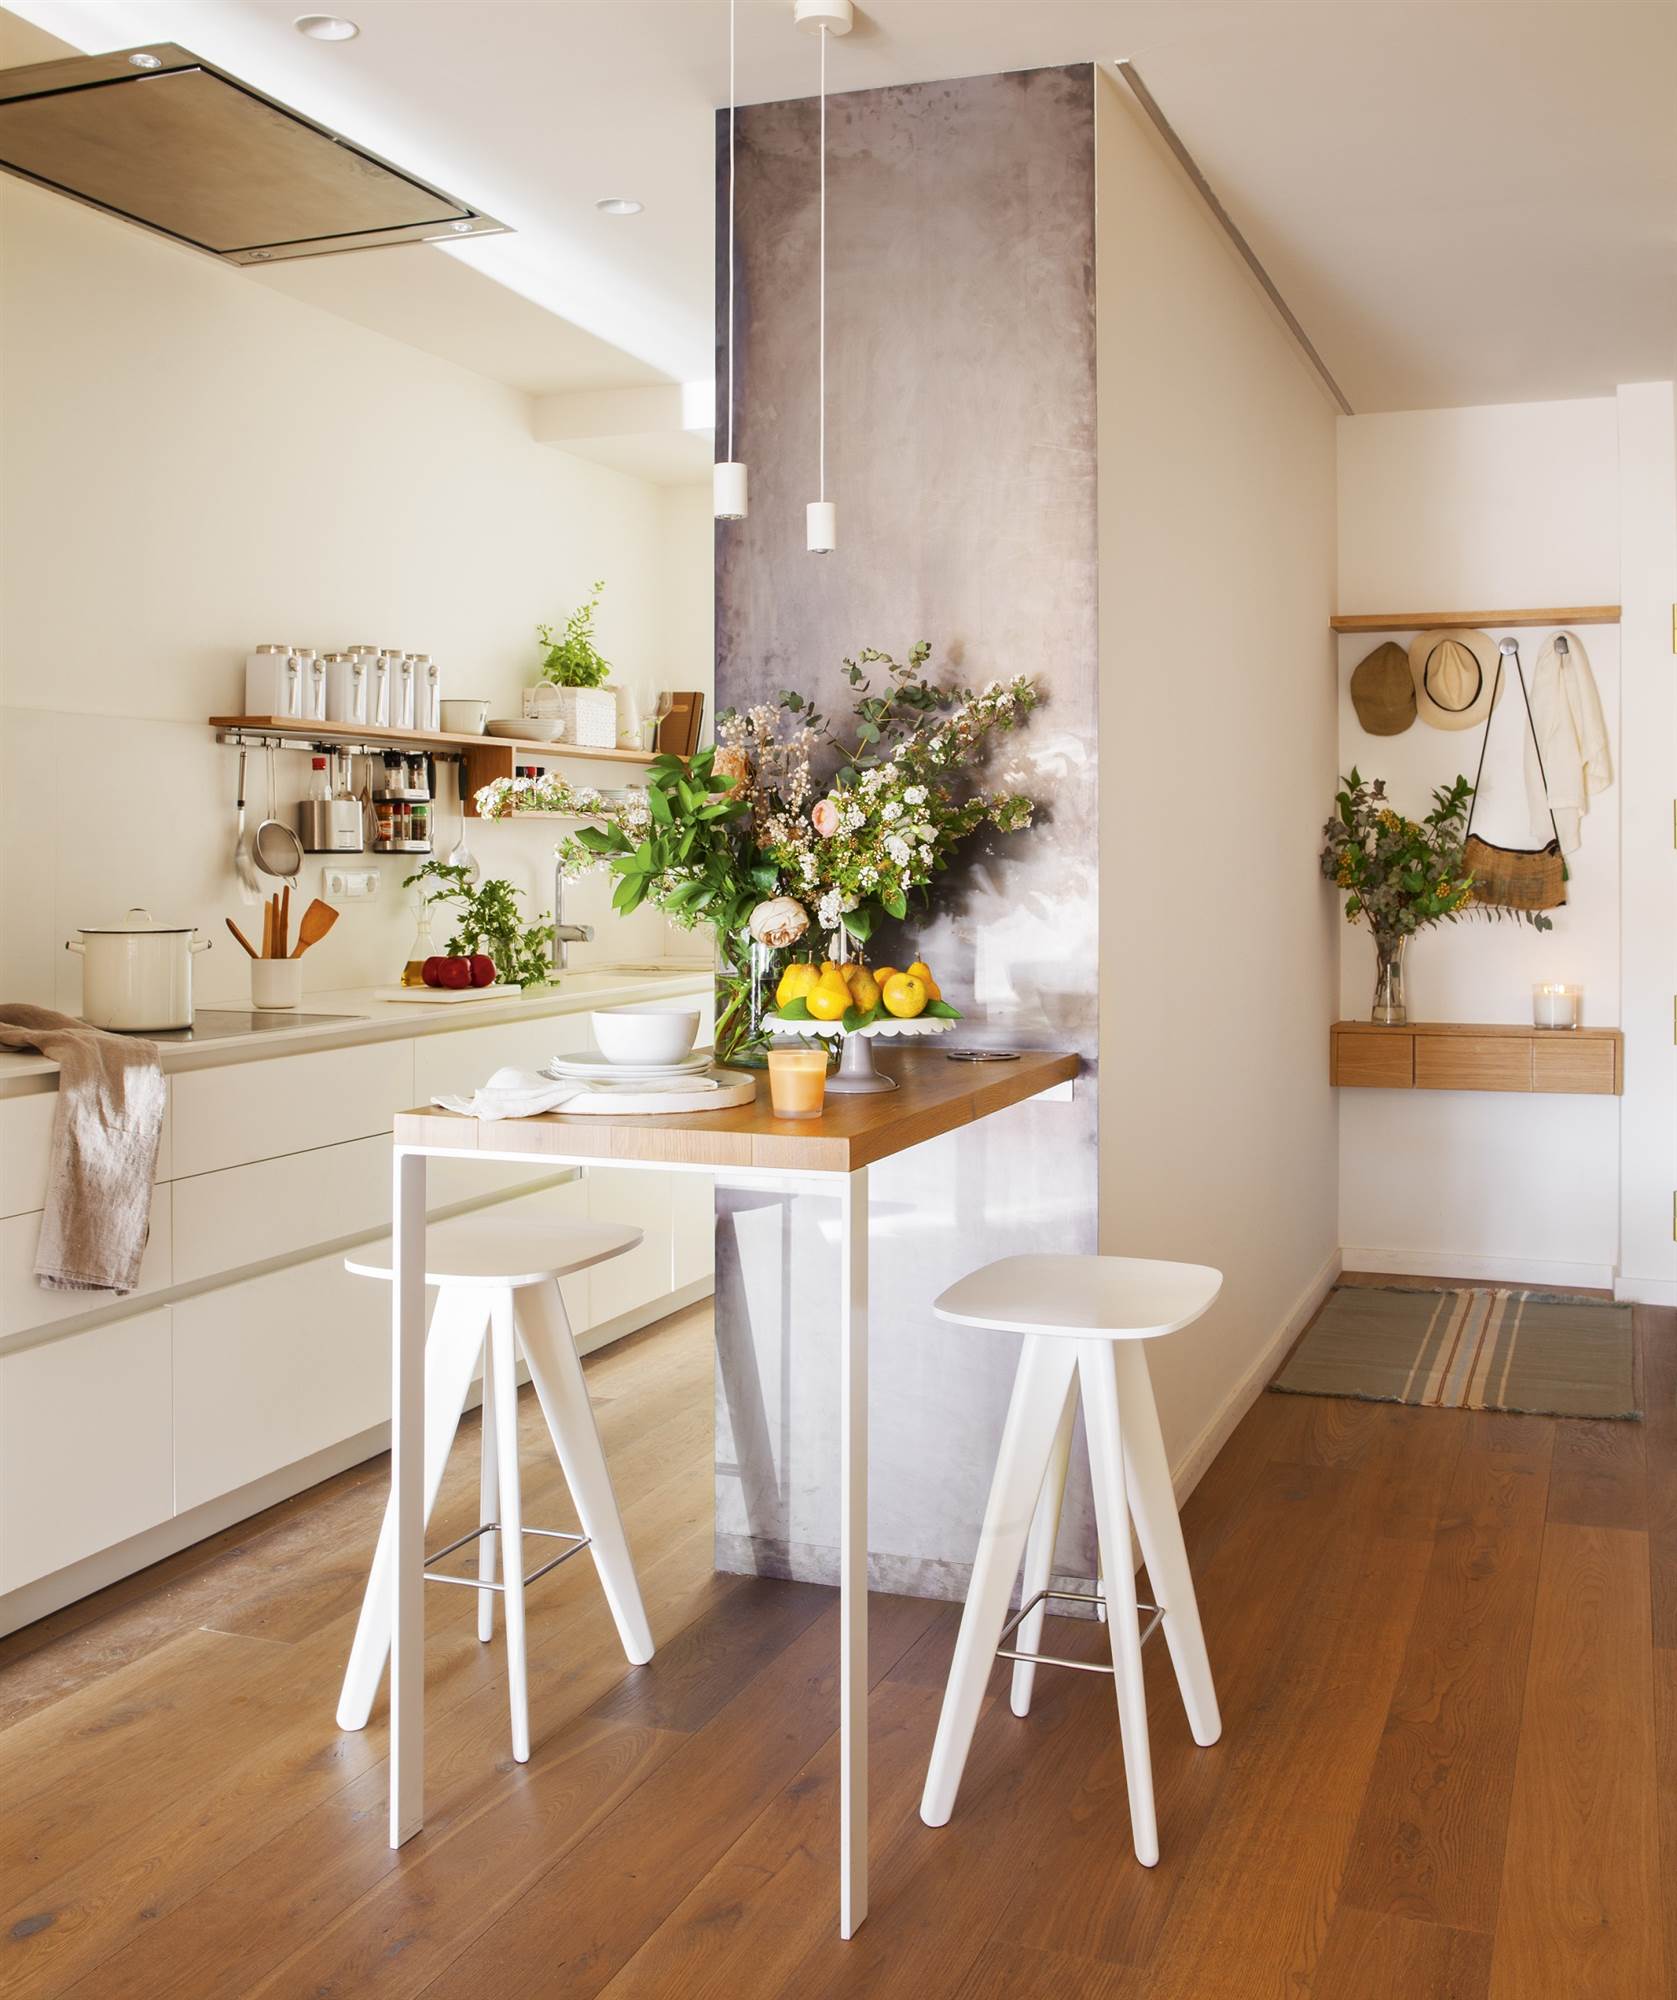 How to take advantage of small spaces in apartments